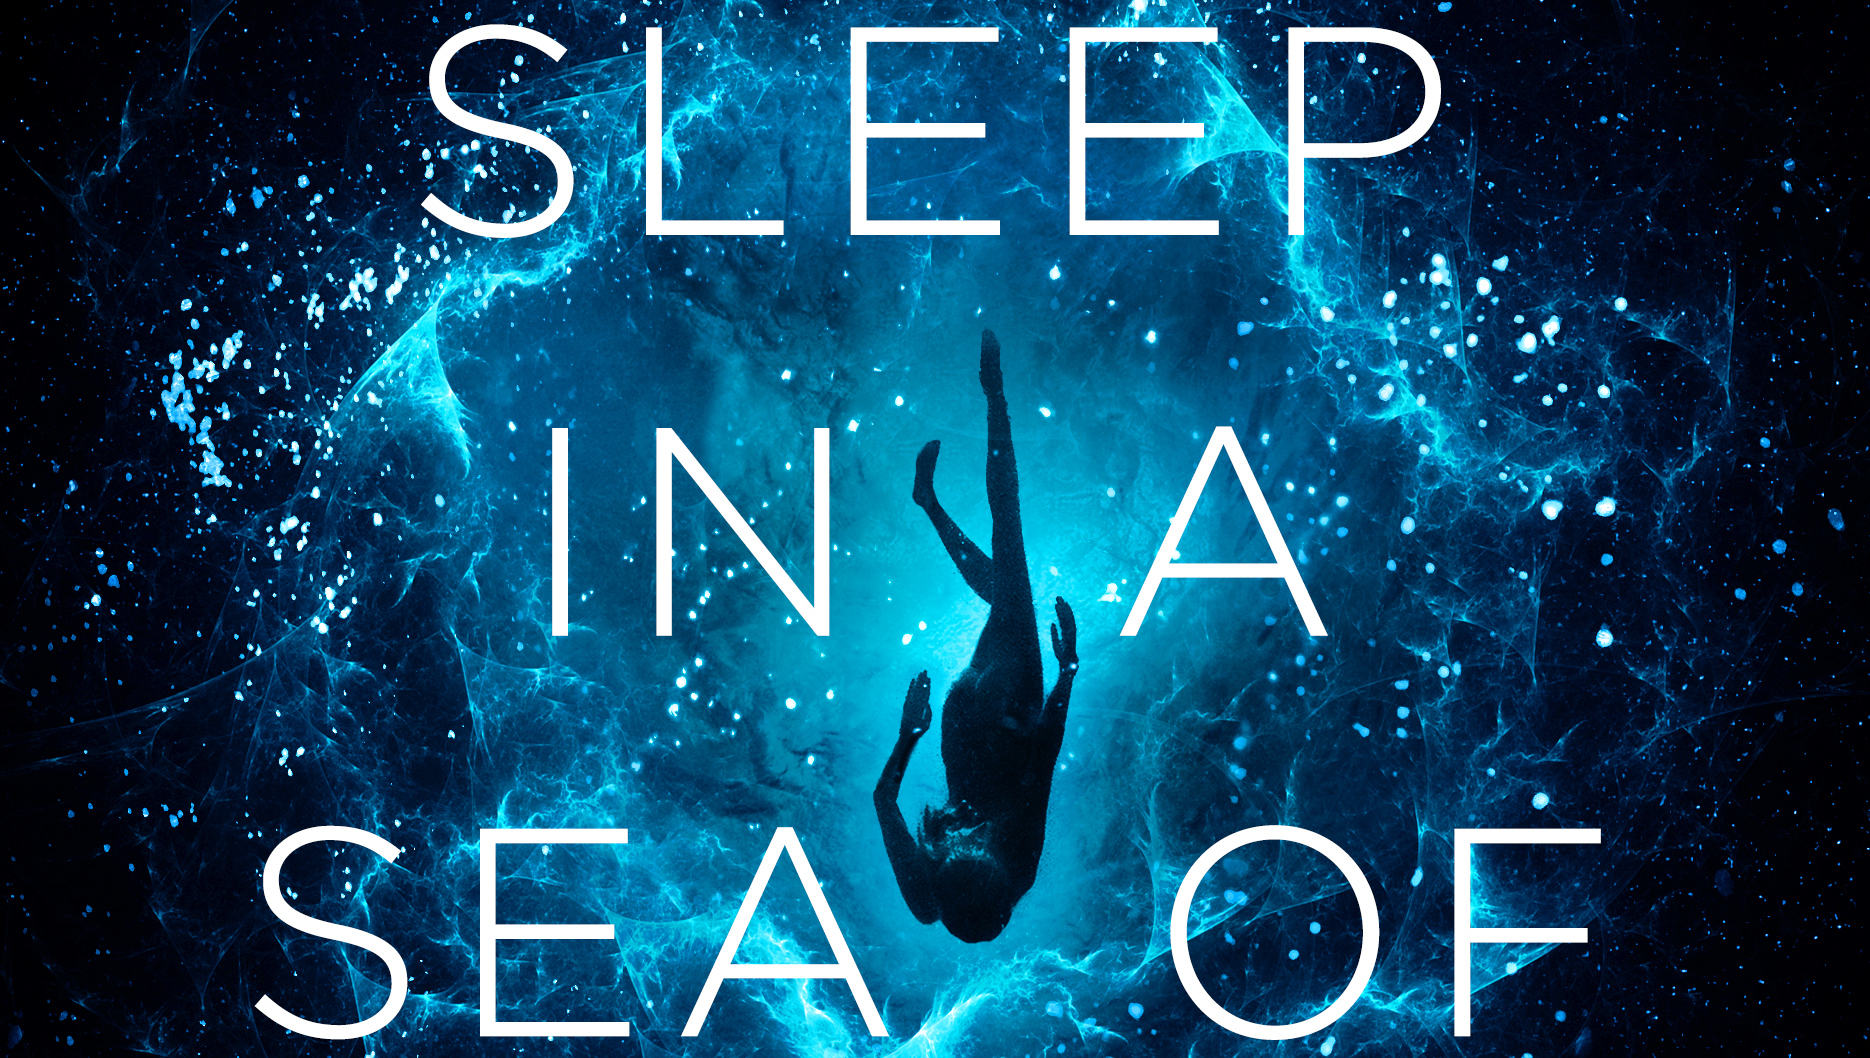 BOOK REVIEW: Christopher Paolini – 'To Sleep in a Sea of Stars